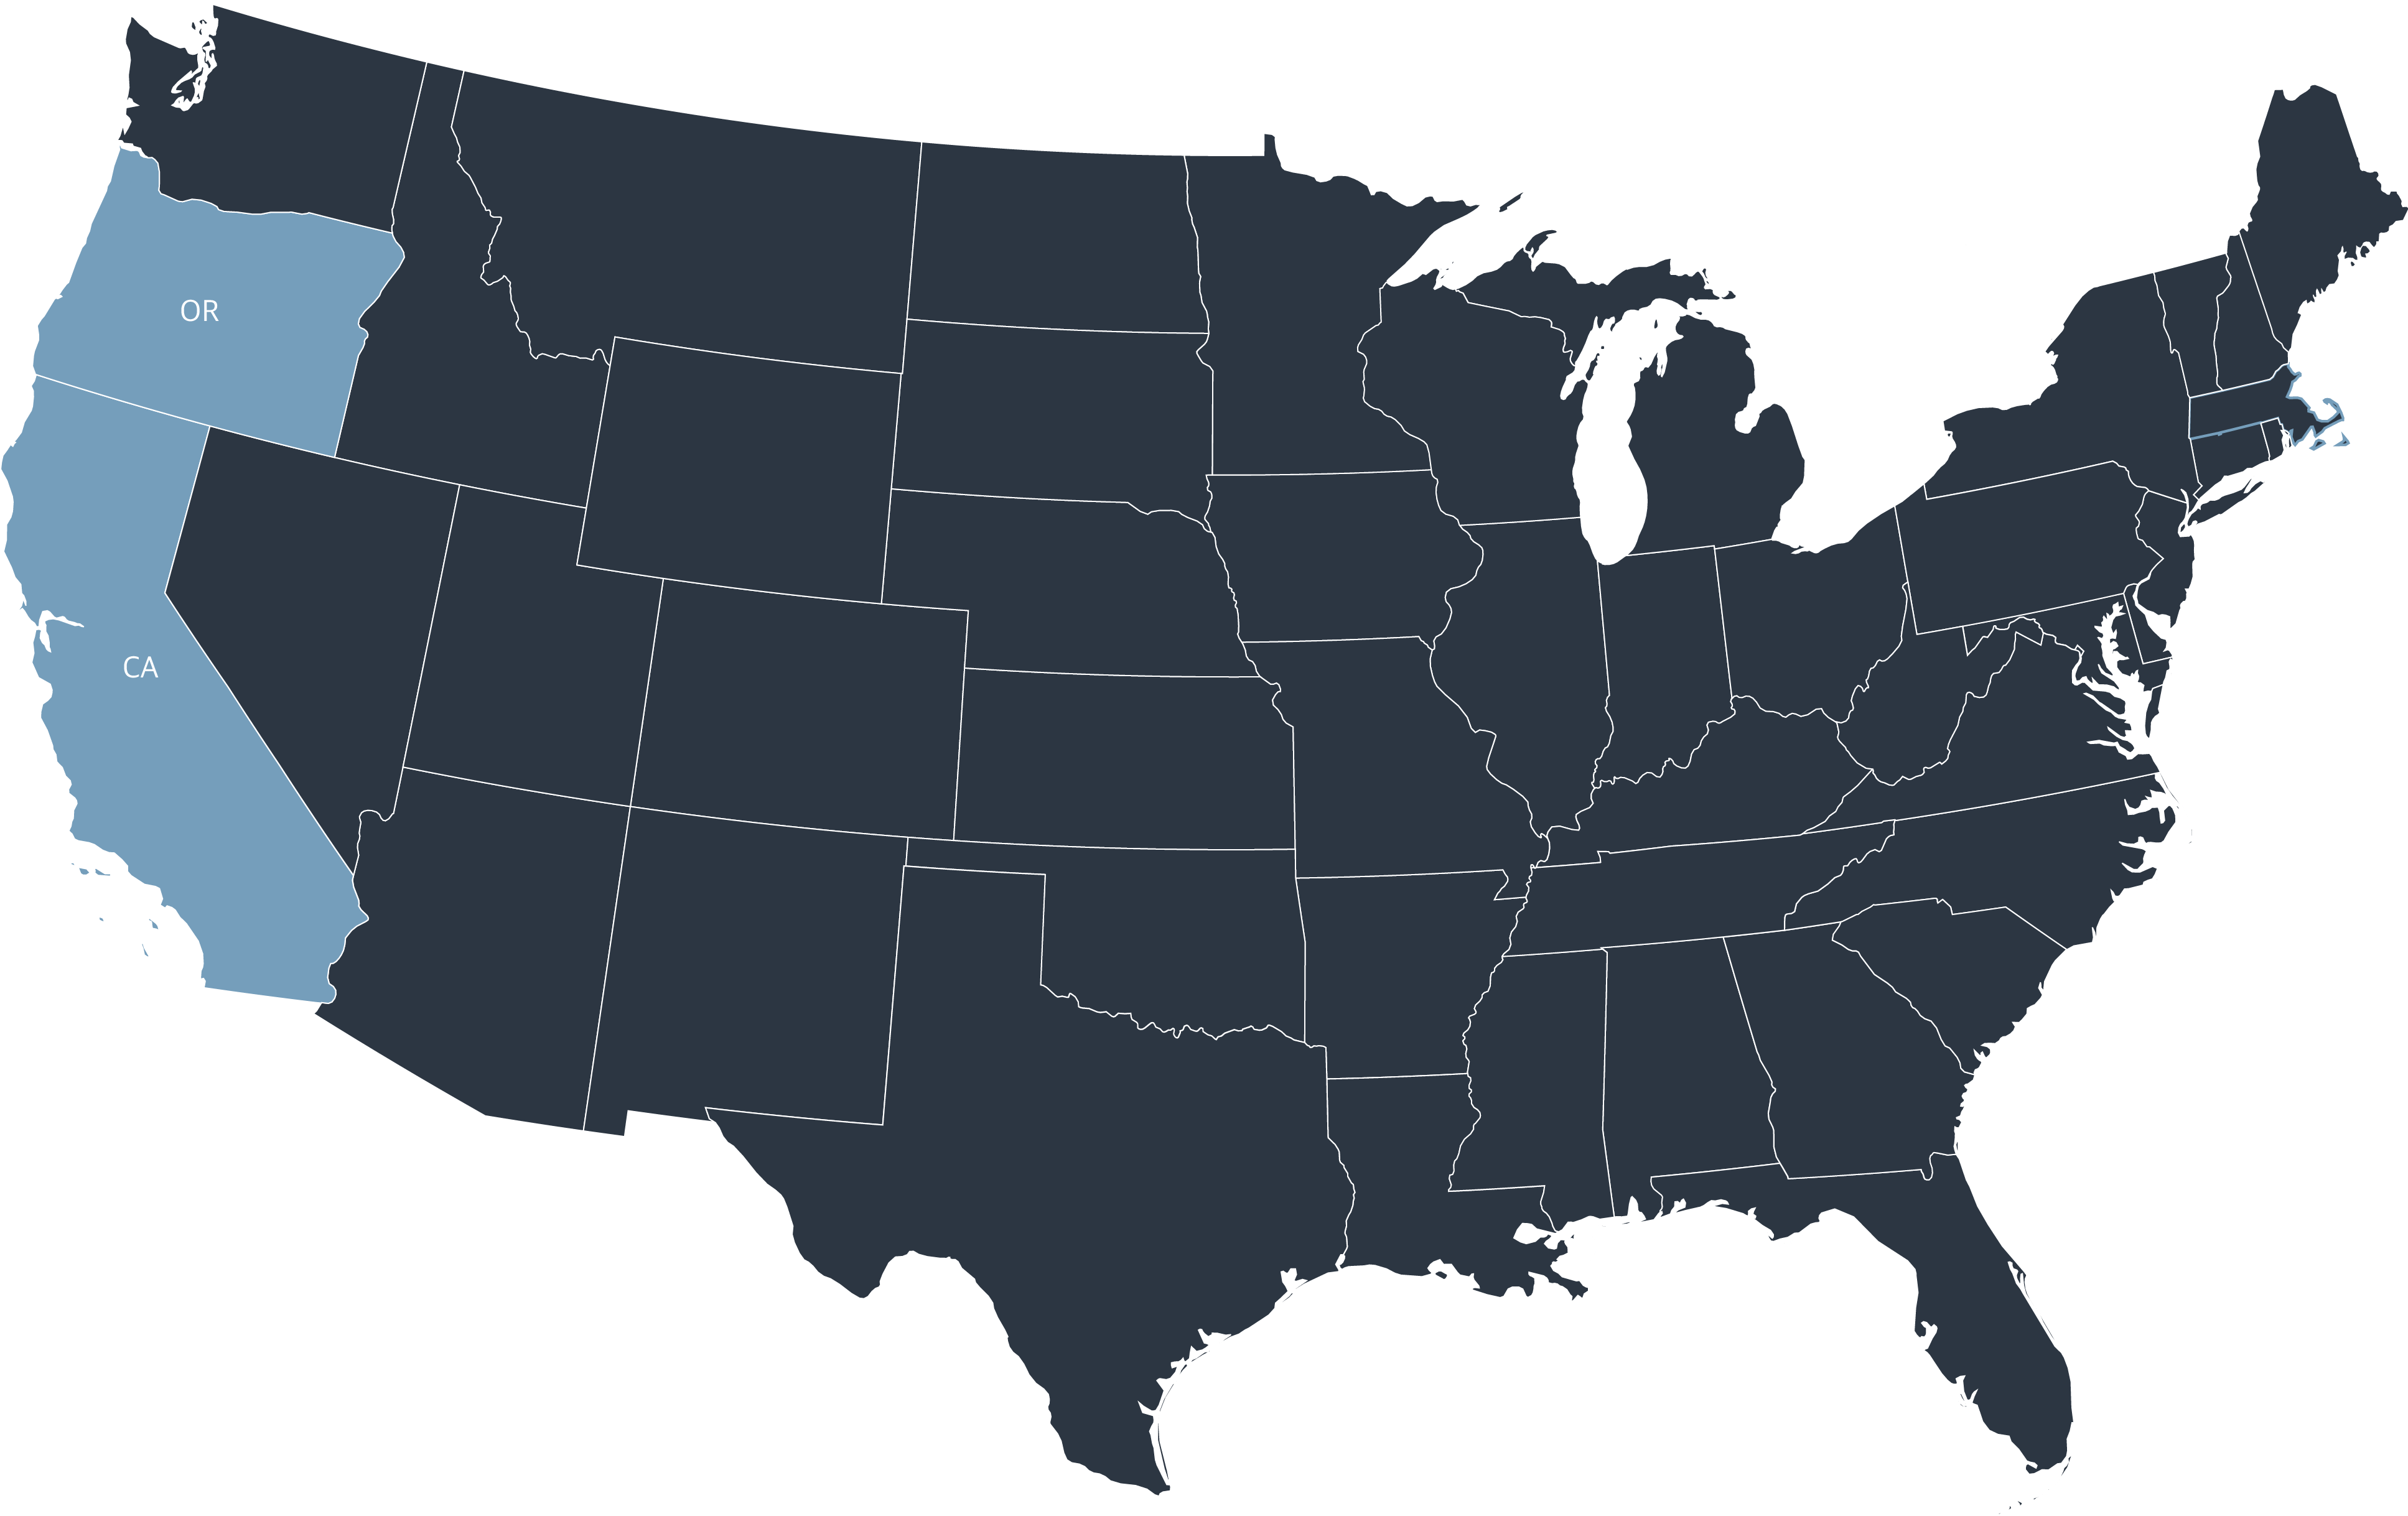 Map of the USA showing LCFS states